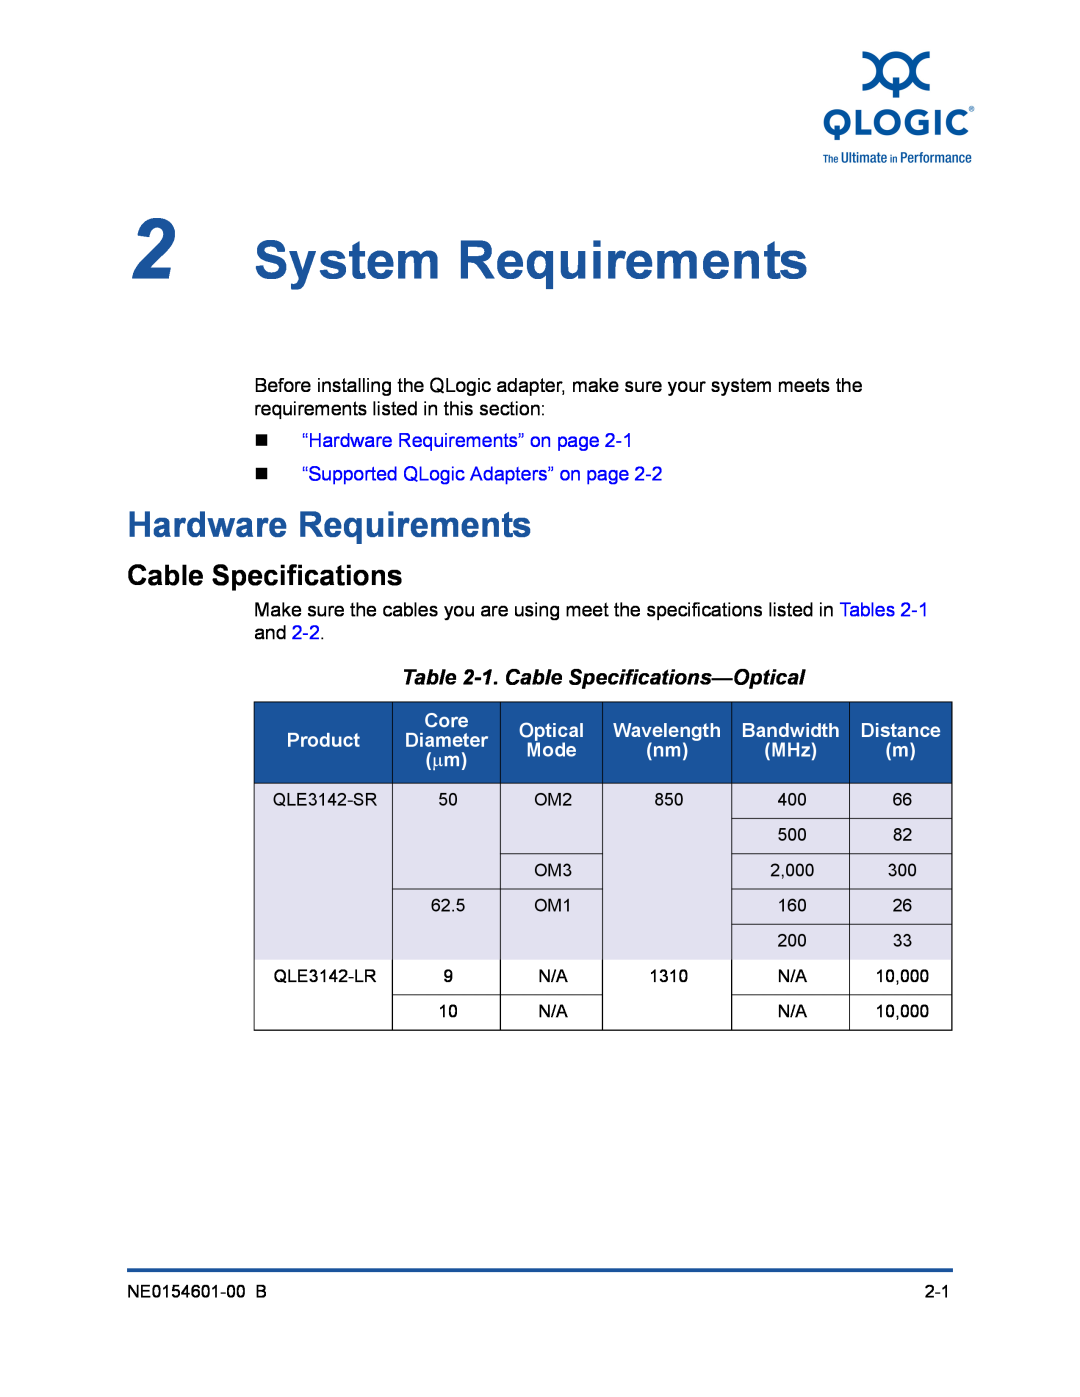 Q-Logic 3000 System Requirements, Hardware Requirements, 1. Cable Specifications-Optical, Core, Wavelength, Bandwidth 